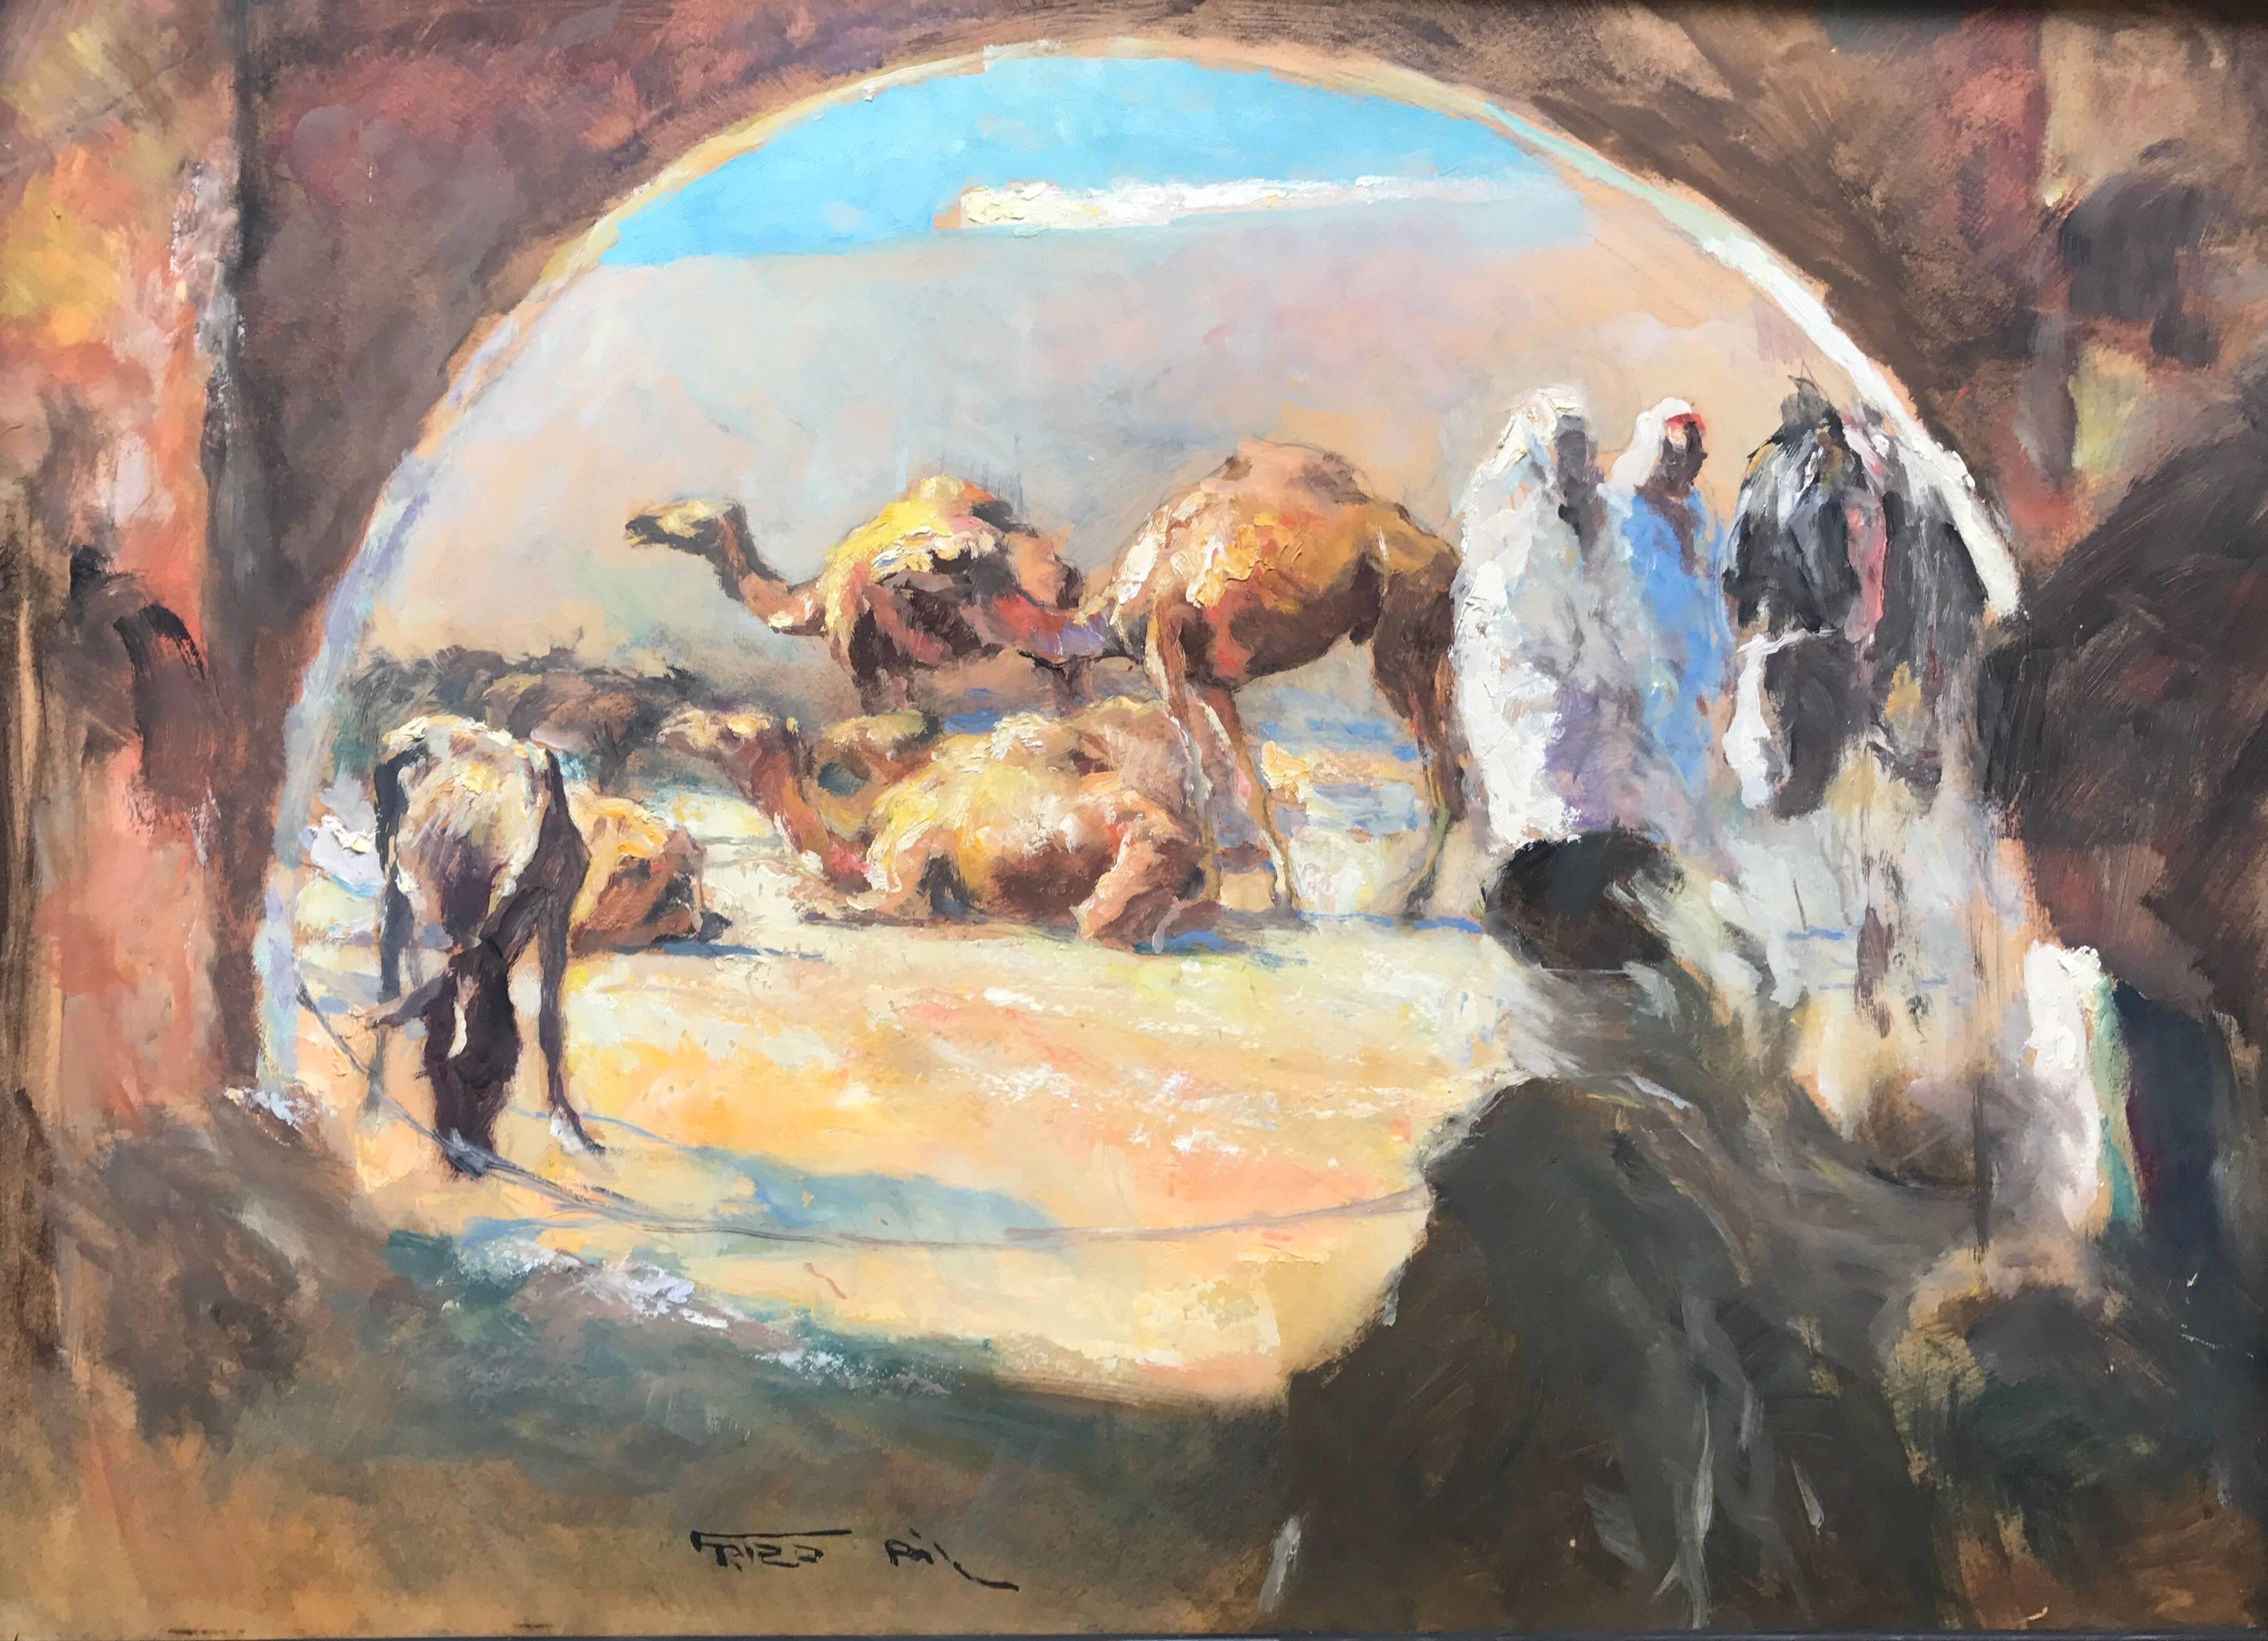 Rest in the desert - Painting by Pal Fried